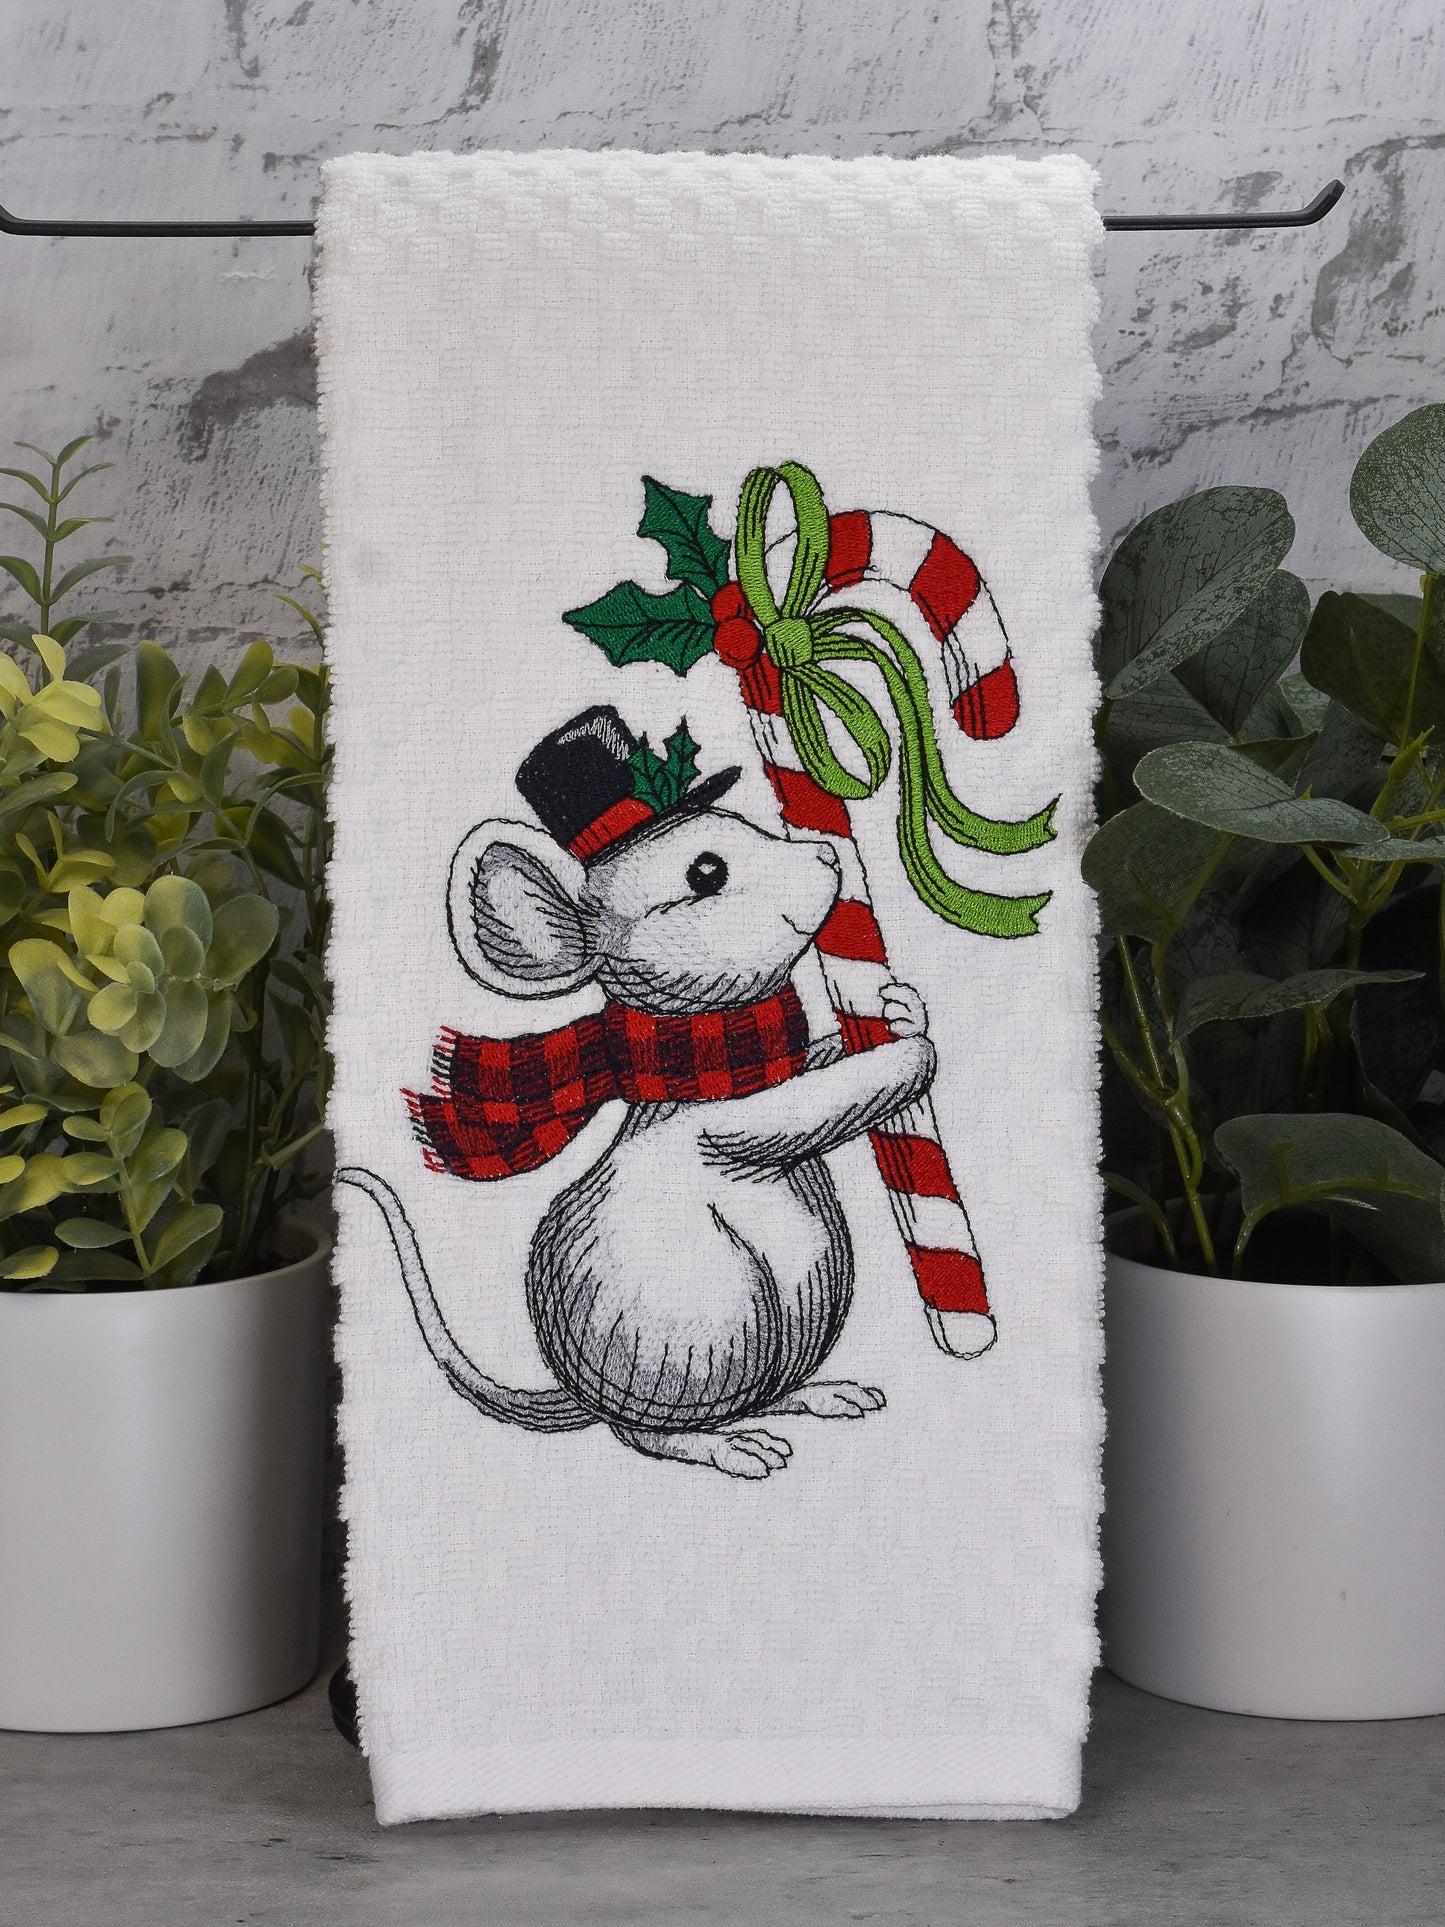 Mouse Candy Cane Towel - Embroidered Christmas Design